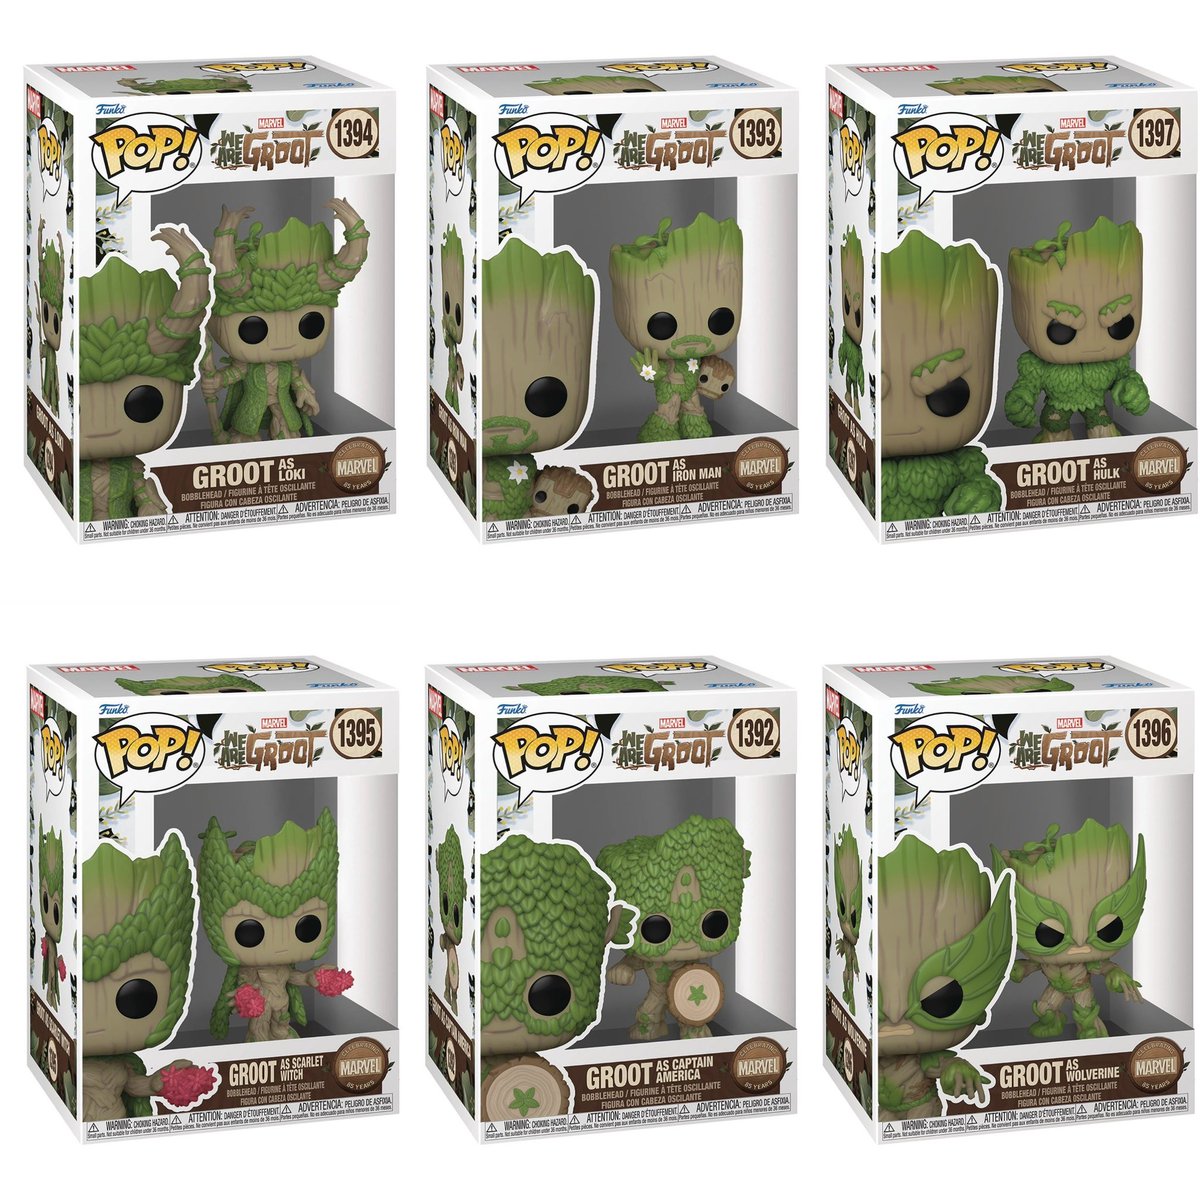 First look at We Are Groot Funko Pops! #groot